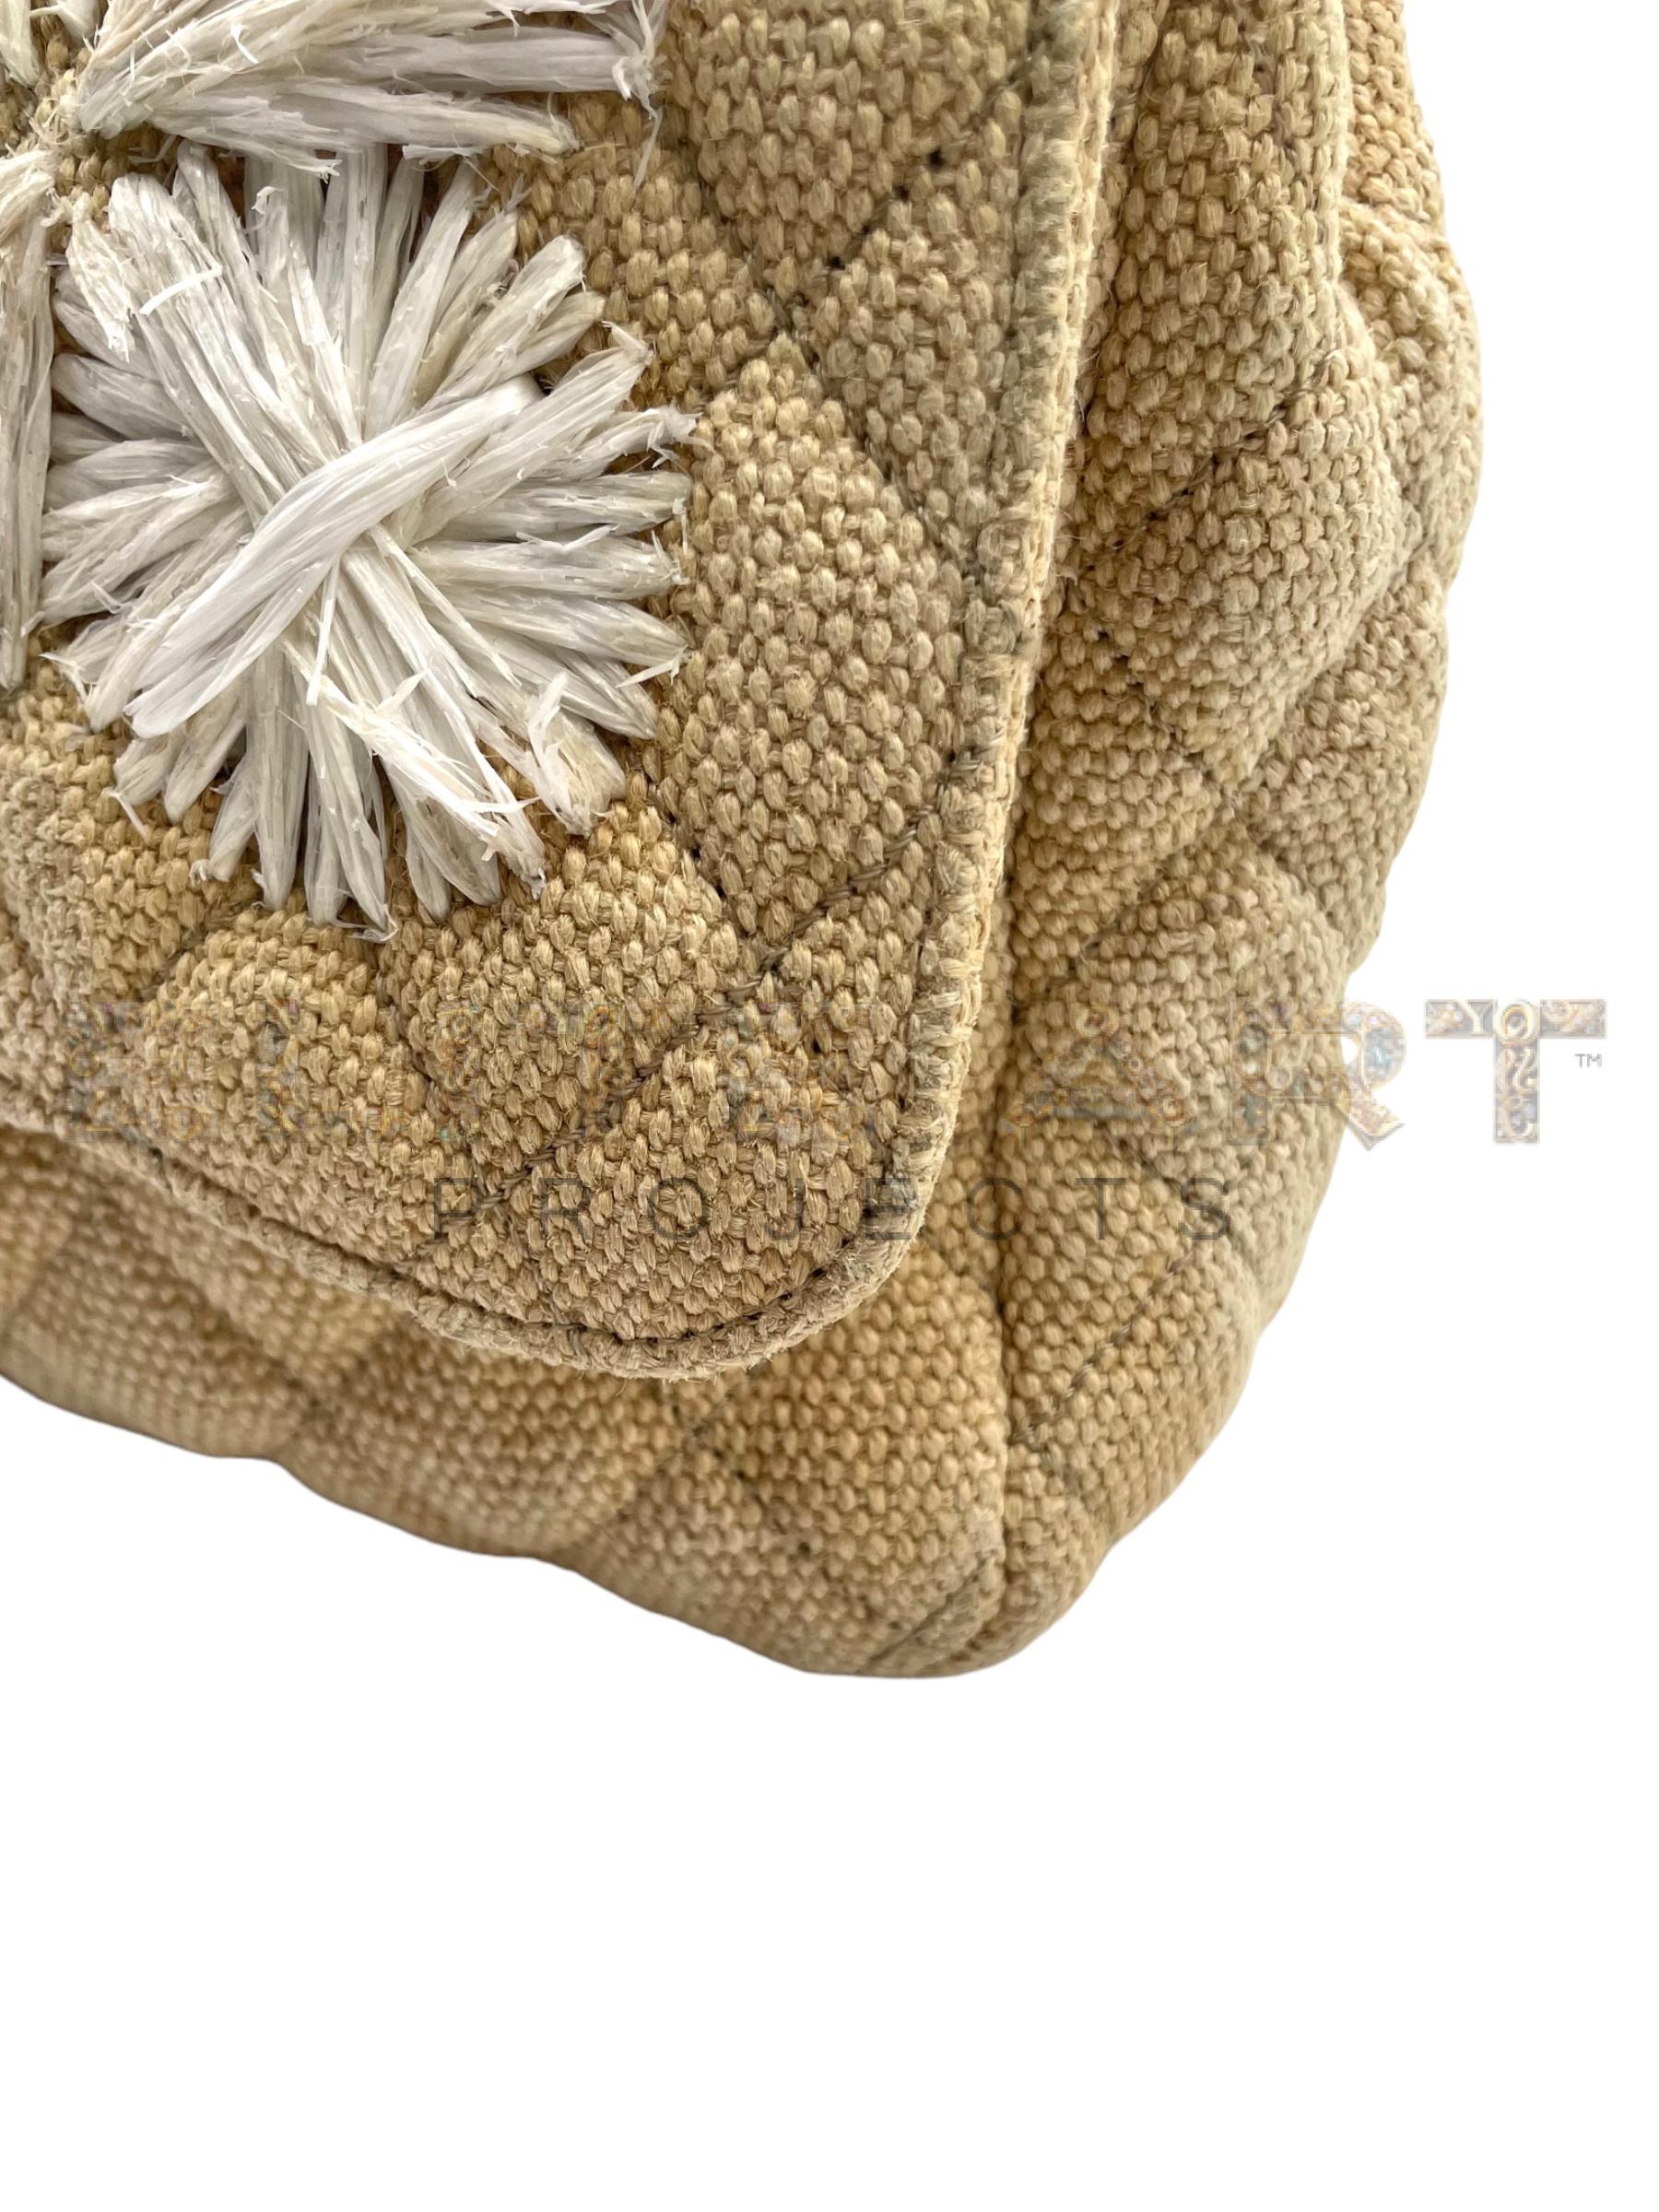 Jumbo bag, raffia, beige, floral embroidery, gold-tone accents, spacious, practical, style, functionality, 2009/10, good condition